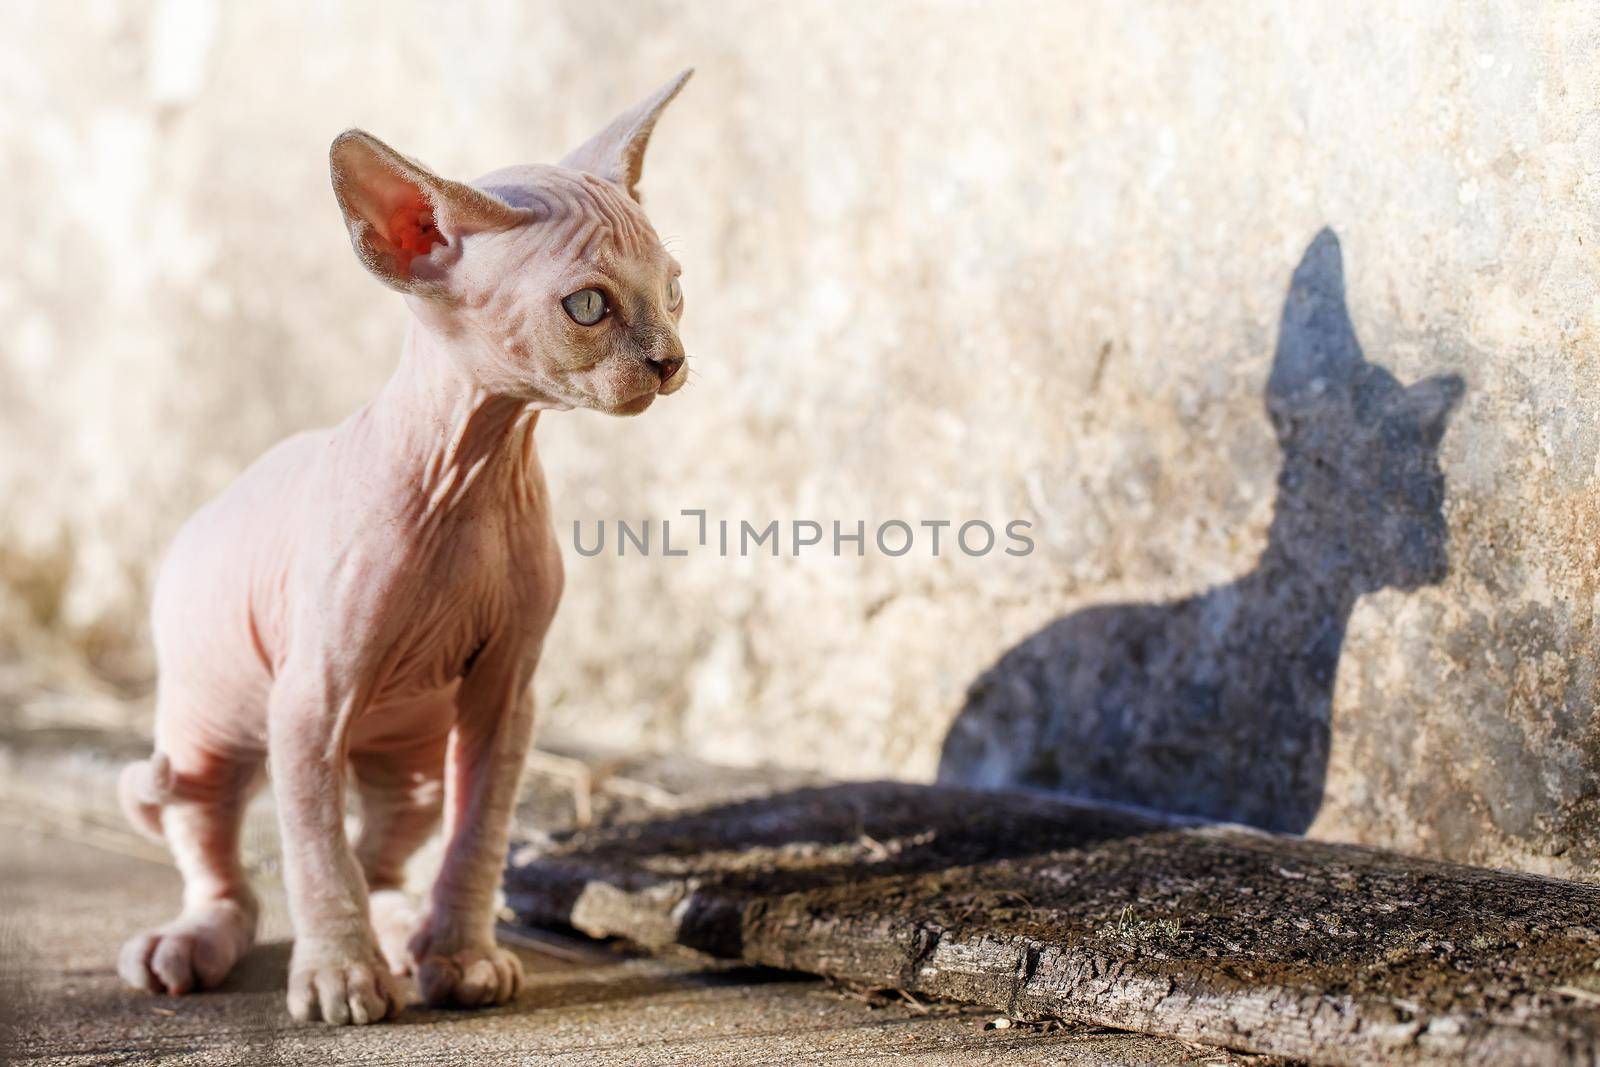 Nice Canadian sphynx kitten walking on a concrete pathway and looking at self shadow. Cat without fur and her shadow in foundation background . Concept, pet love, animal life, cats breeding, enjoy freedom